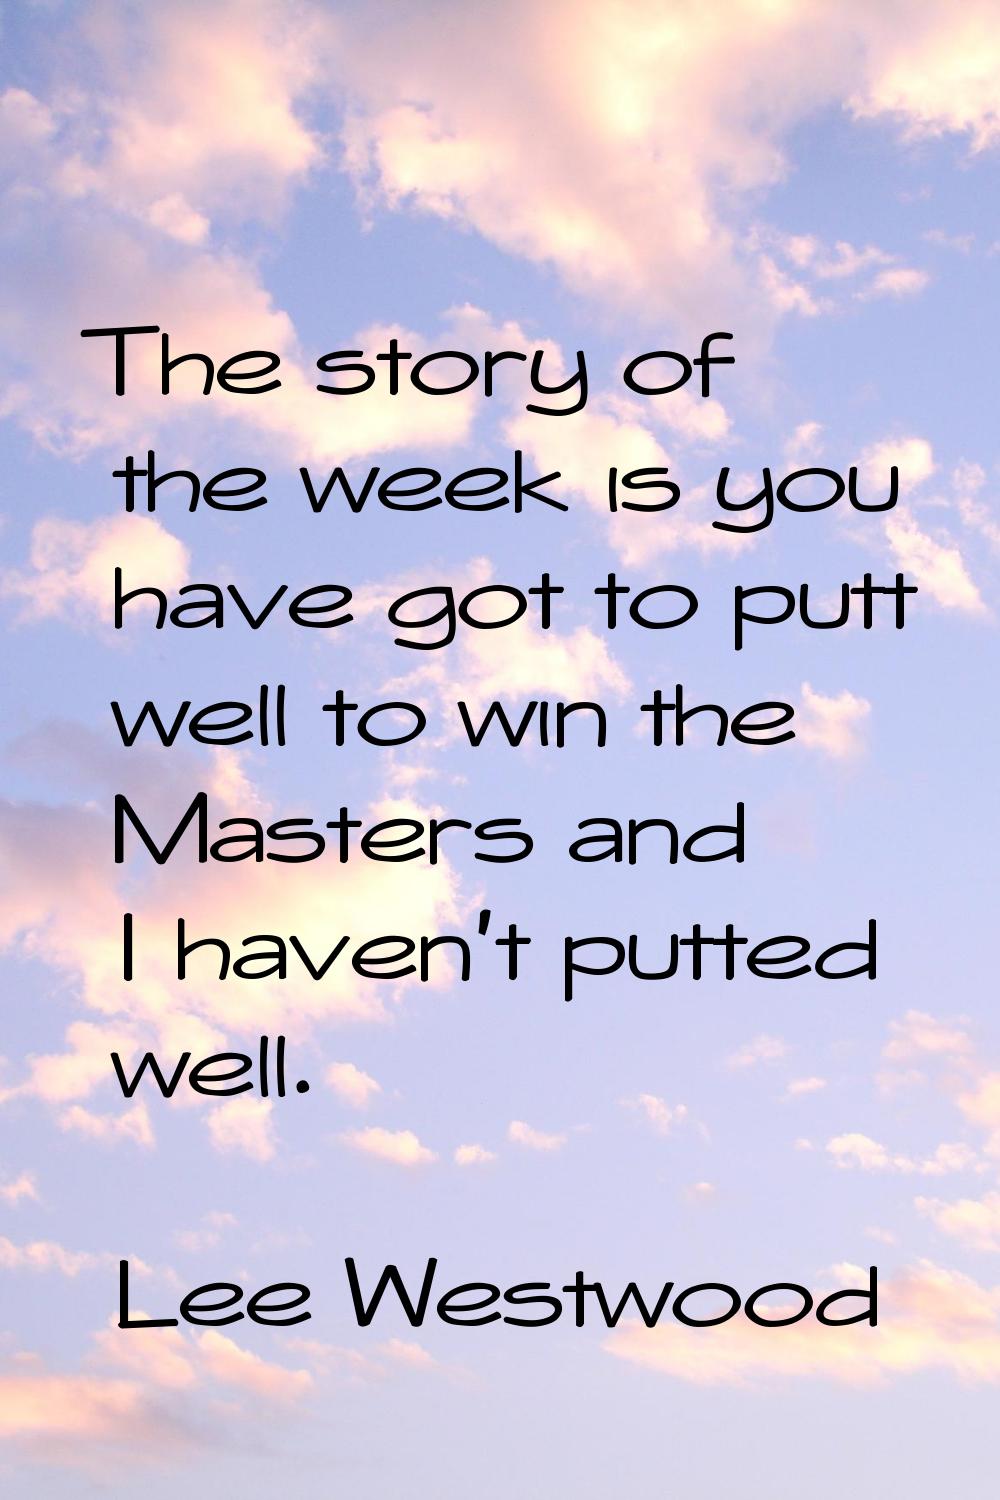 The story of the week is you have got to putt well to win the Masters and I haven't putted well.